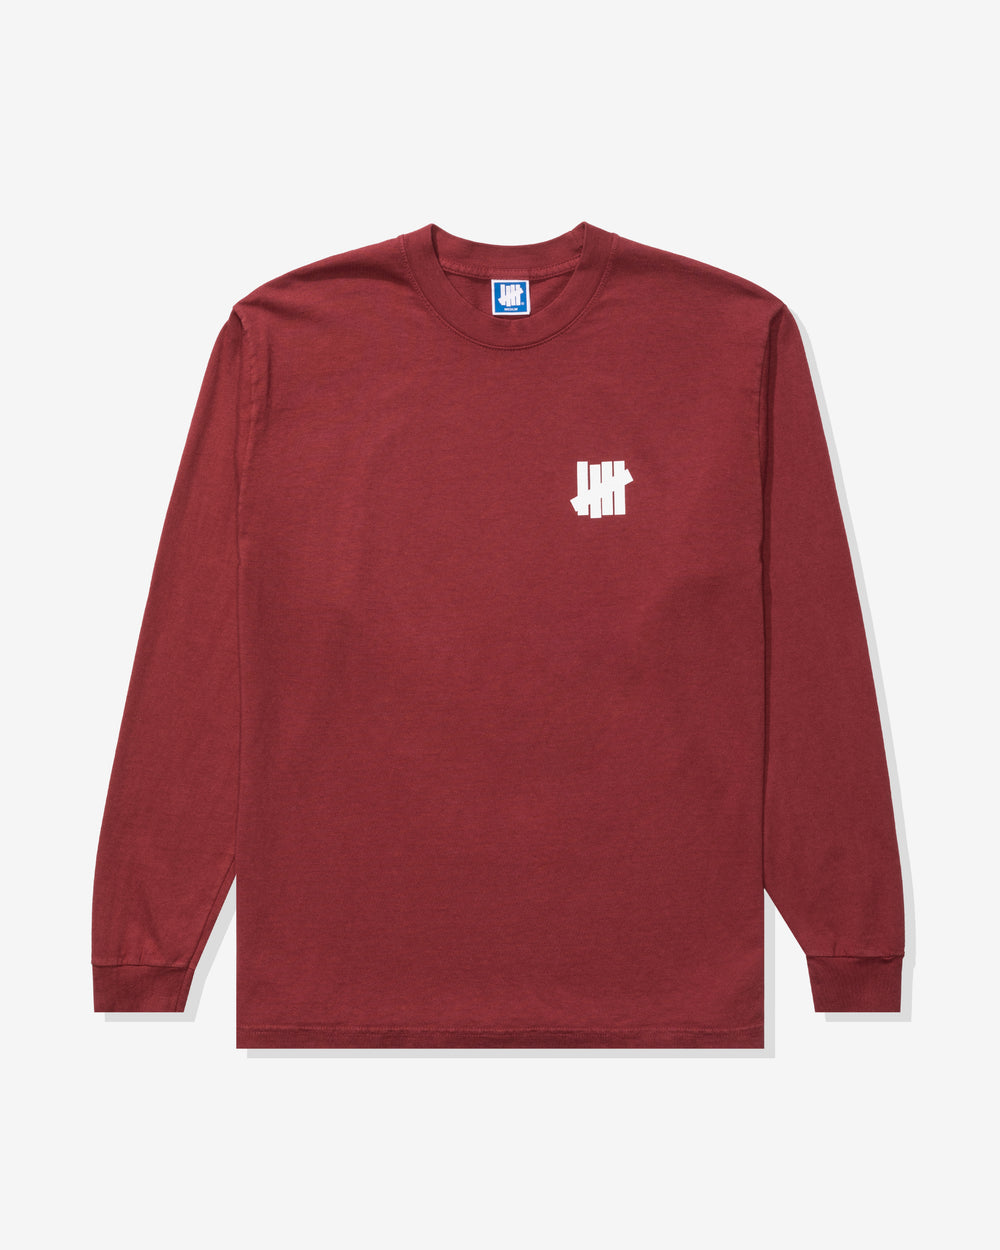 UNDEFEATED ICON L/S TEE – Undefeated